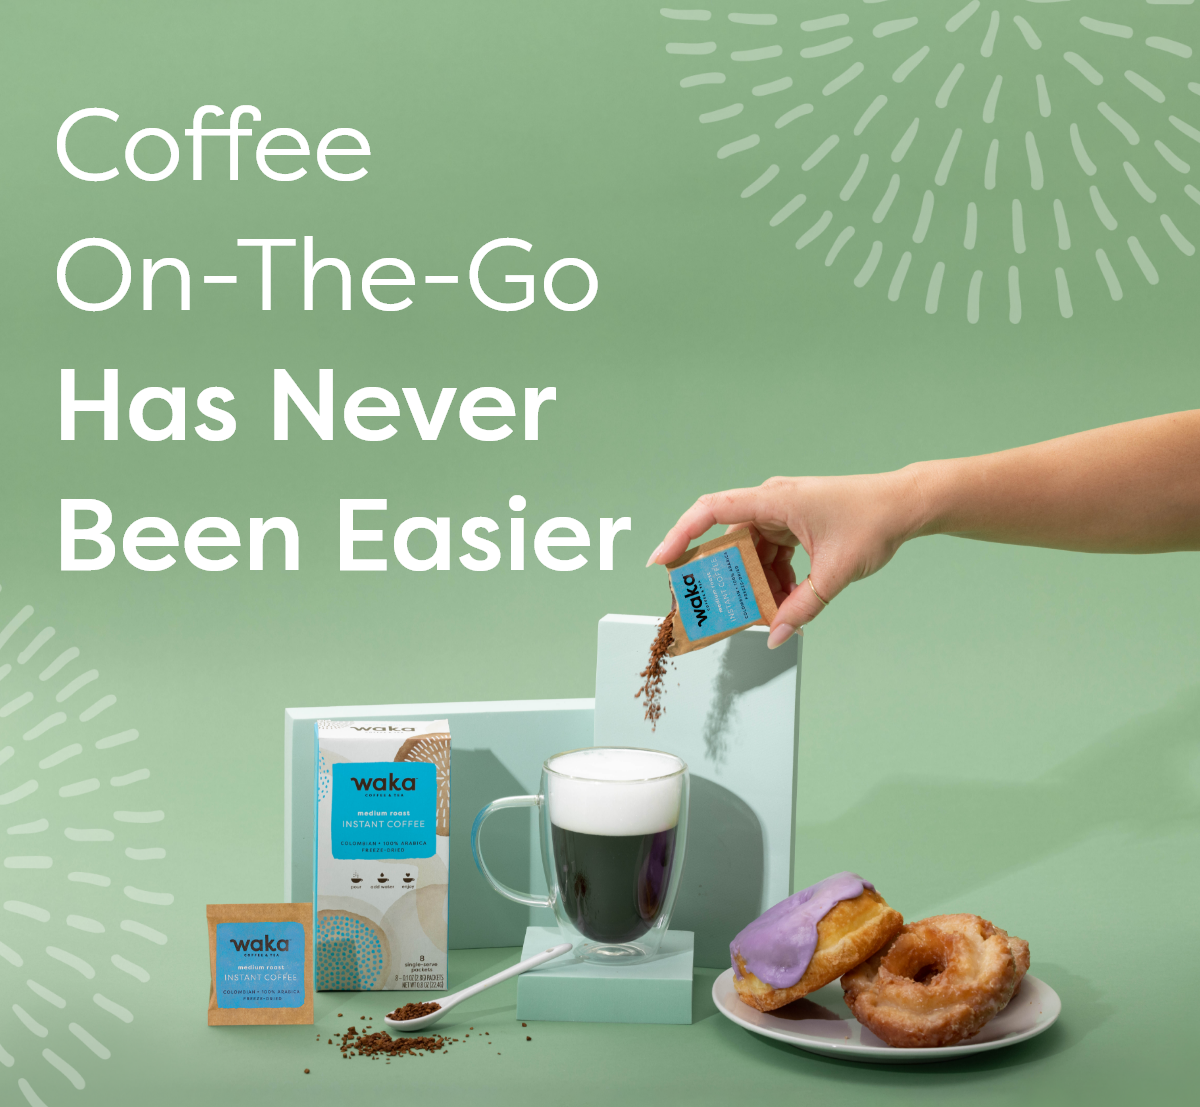 Coffee On-The-Go Has Never Been Easier